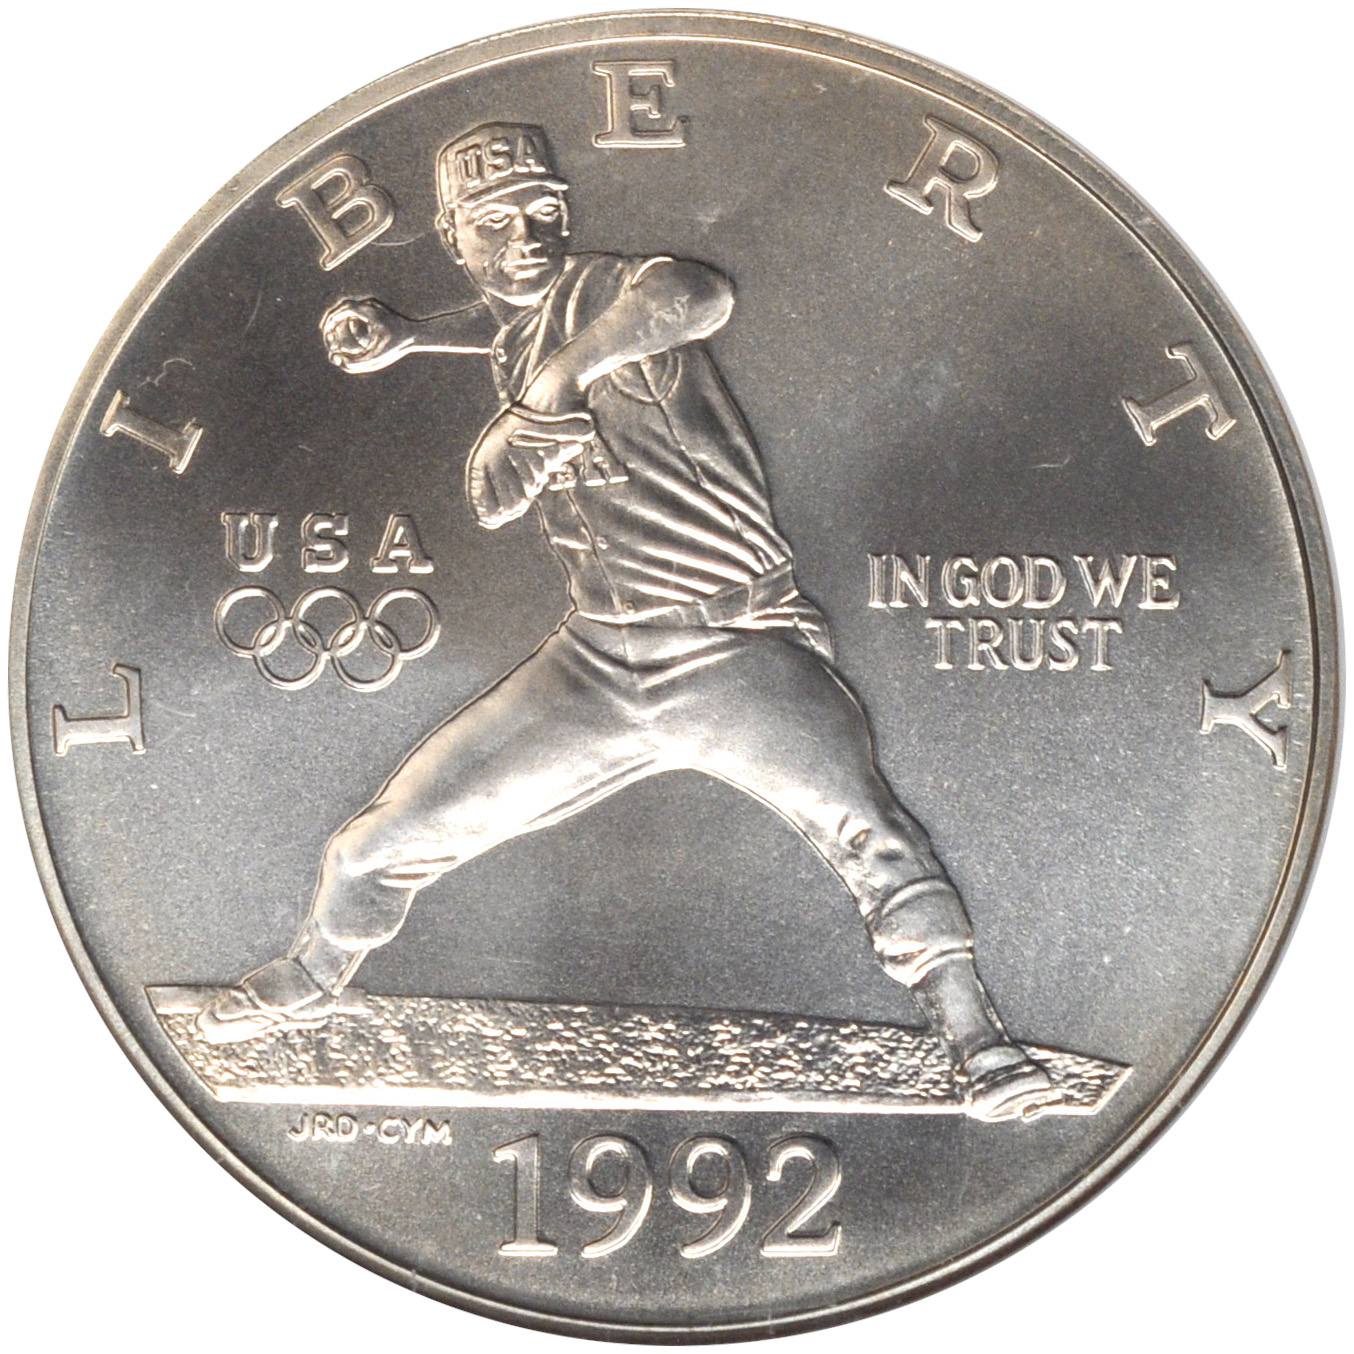 Value Of 1992 1 Olympic Silver Coin Sell Silver Coins